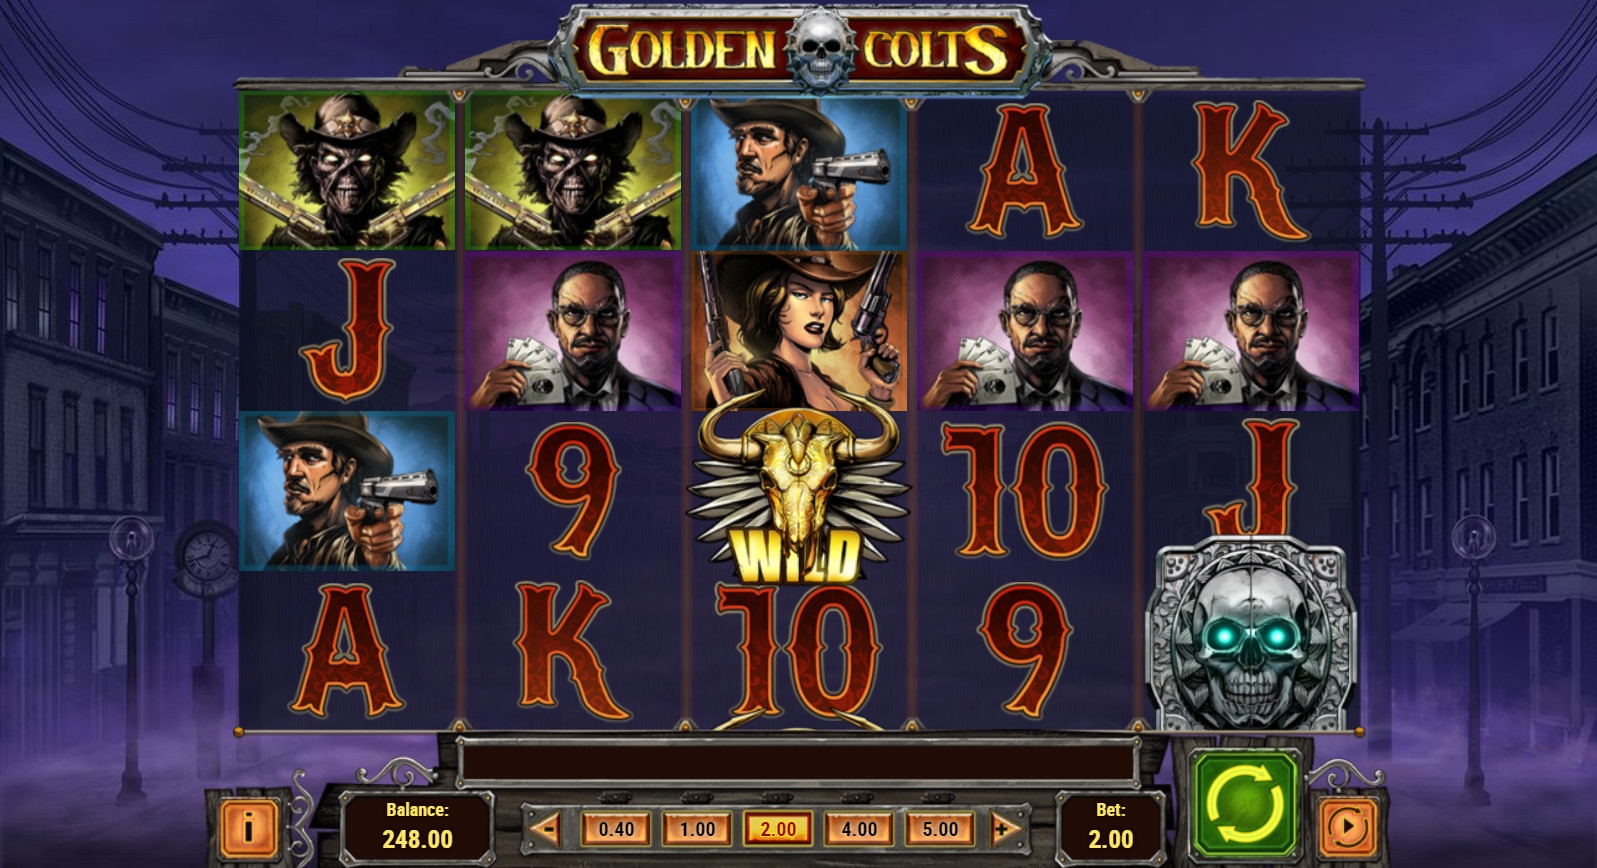 Golden Colts (Golden Colts) from category Slots